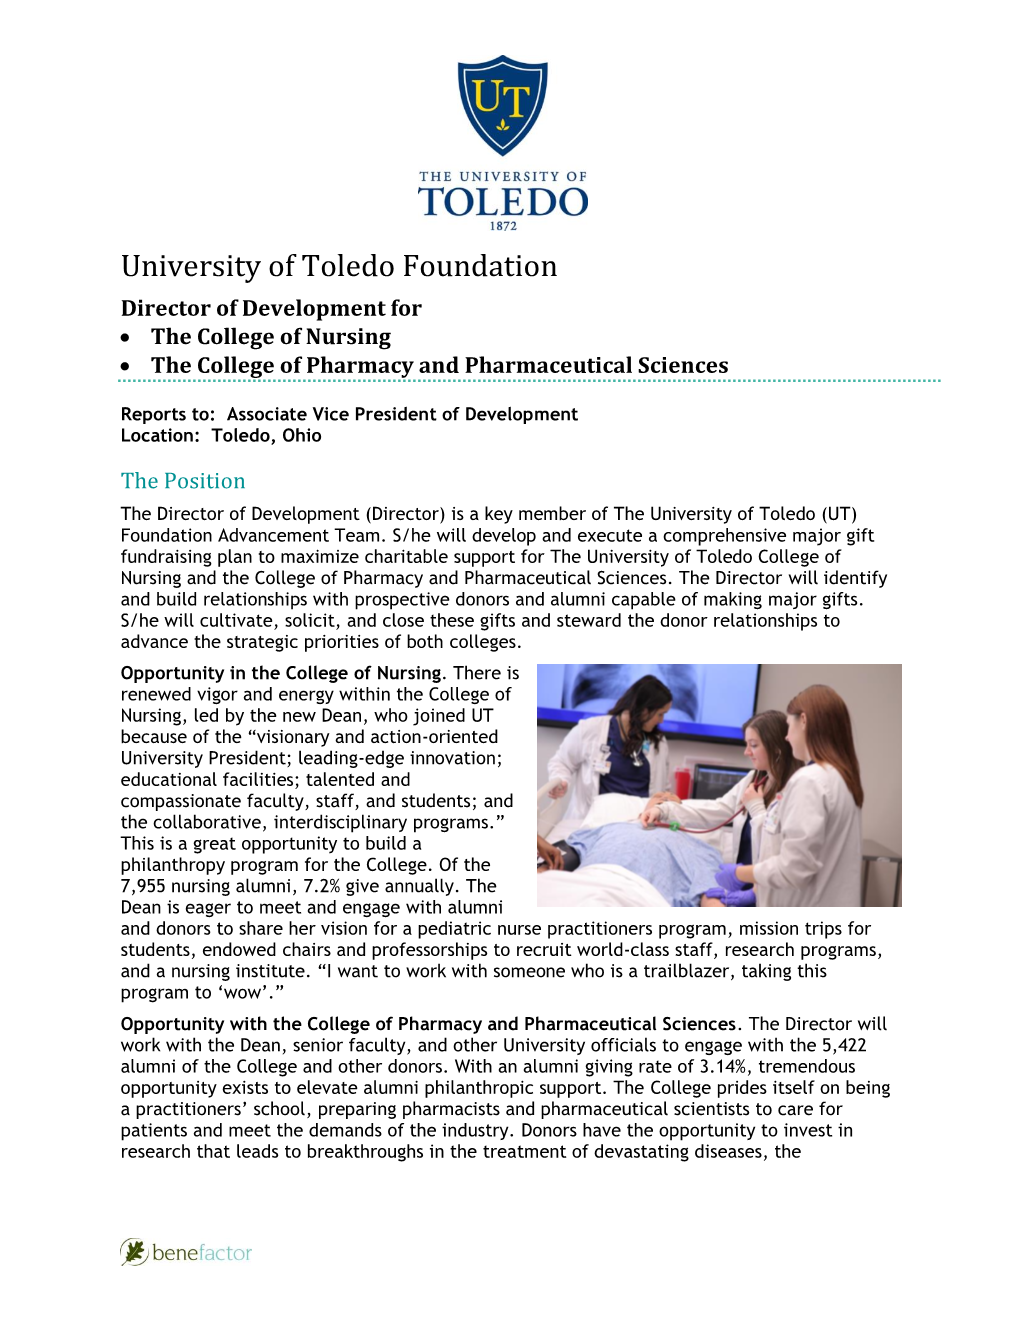 University of Toledo Foundation Director of Development for • the College of Nursing • the College of Pharmacy and Pharmaceutical Sciences